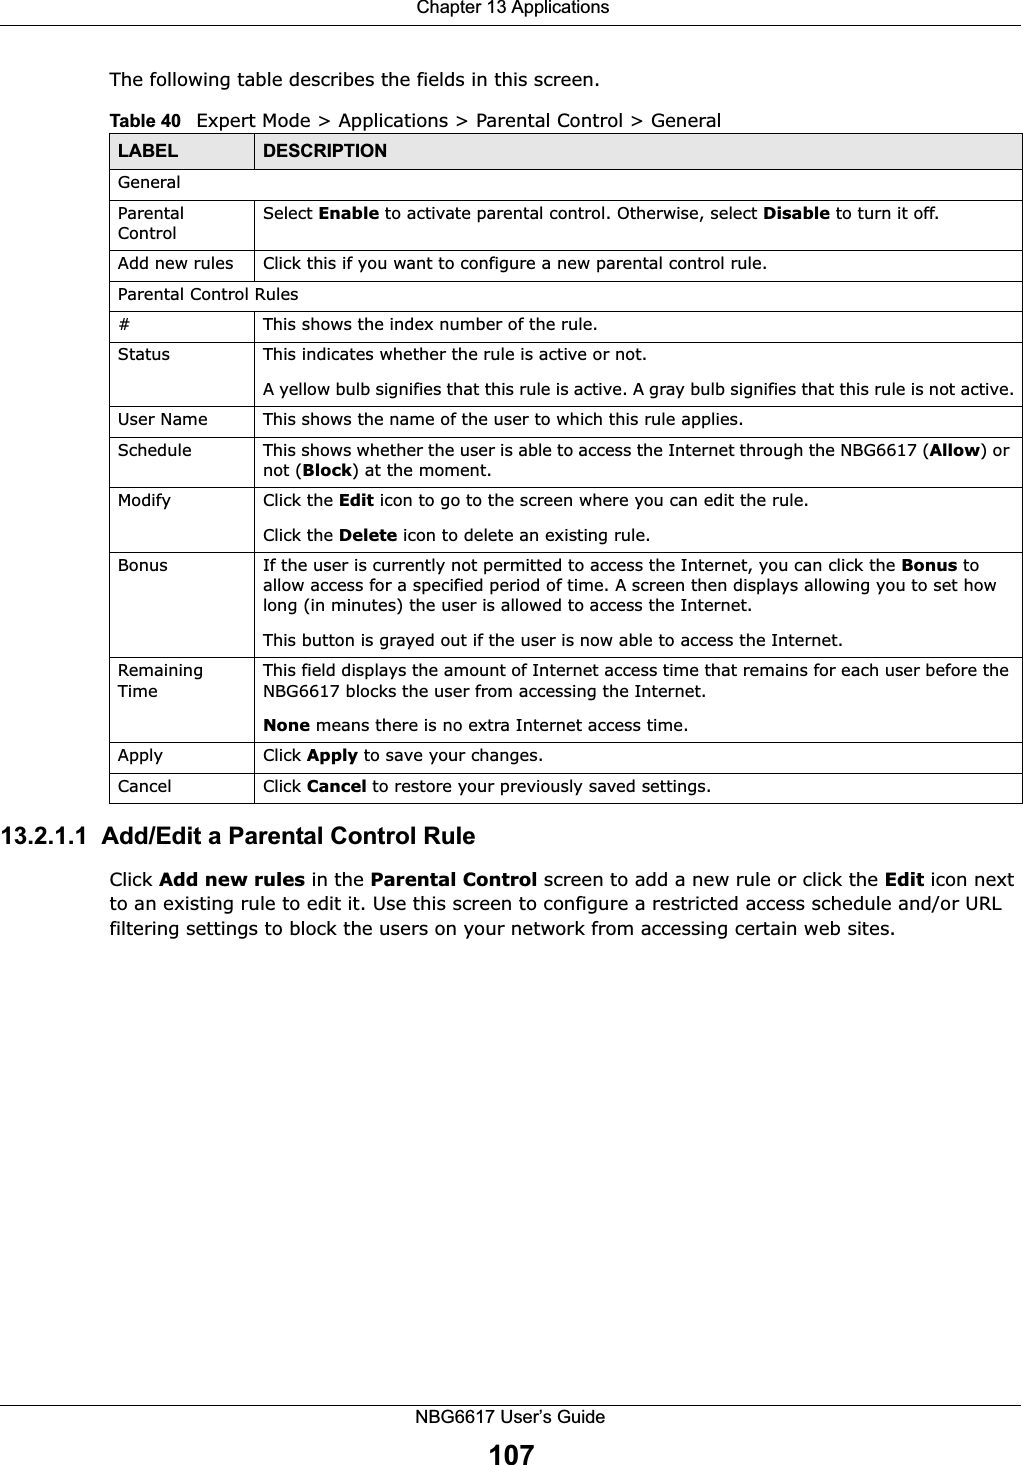  Chapter 13 ApplicationsNBG6617 User’s Guide107The following table describes the fields in this screen. 13.2.1.1  Add/Edit a Parental Control RuleClick Add new rules in the Parental Control screen to add a new rule or click the Edit icon next to an existing rule to edit it. Use this screen to configure a restricted access schedule and/or URL filtering settings to block the users on your network from accessing certain web sites.Table 40   Expert Mode &gt; Applications &gt; Parental Control &gt; GeneralLABEL DESCRIPTIONGeneralParental ControlSelect Enable to activate parental control. Otherwise, select Disable to turn it off.Add new rules Click this if you want to configure a new parental control rule.Parental Control Rules#This shows the index number of the rule.Status This indicates whether the rule is active or not.A yellow bulb signifies that this rule is active. A gray bulb signifies that this rule is not active.User Name This shows the name of the user to which this rule applies.Schedule This shows whether the user is able to access the Internet through the NBG6617 (Allow) or not (Block) at the moment.Modify Click the Edit icon to go to the screen where you can edit the rule.Click the Delete icon to delete an existing rule.Bonus If the user is currently not permitted to access the Internet, you can click the Bonus to allow access for a specified period of time. A screen then displays allowing you to set how long (in minutes) the user is allowed to access the Internet.This button is grayed out if the user is now able to access the Internet.Remaining TimeThis field displays the amount of Internet access time that remains for each user before the NBG6617 blocks the user from accessing the Internet.None means there is no extra Internet access time. Apply Click Apply to save your changes.Cancel Click Cancel to restore your previously saved settings.